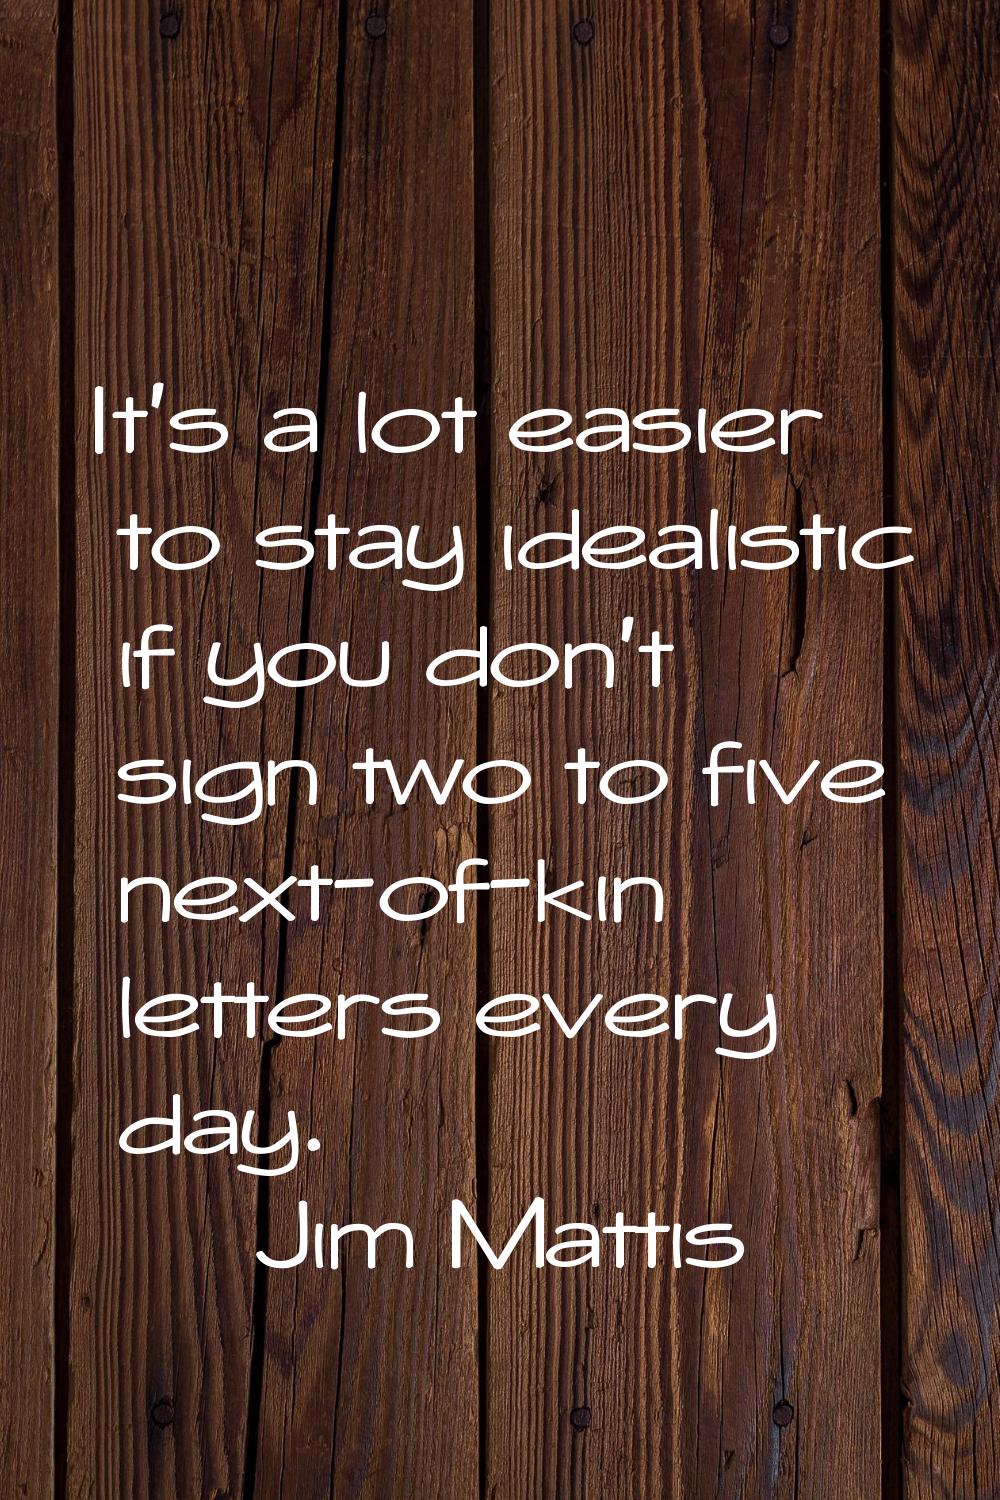 It's a lot easier to stay idealistic if you don't sign two to five next-of-kin letters every day.